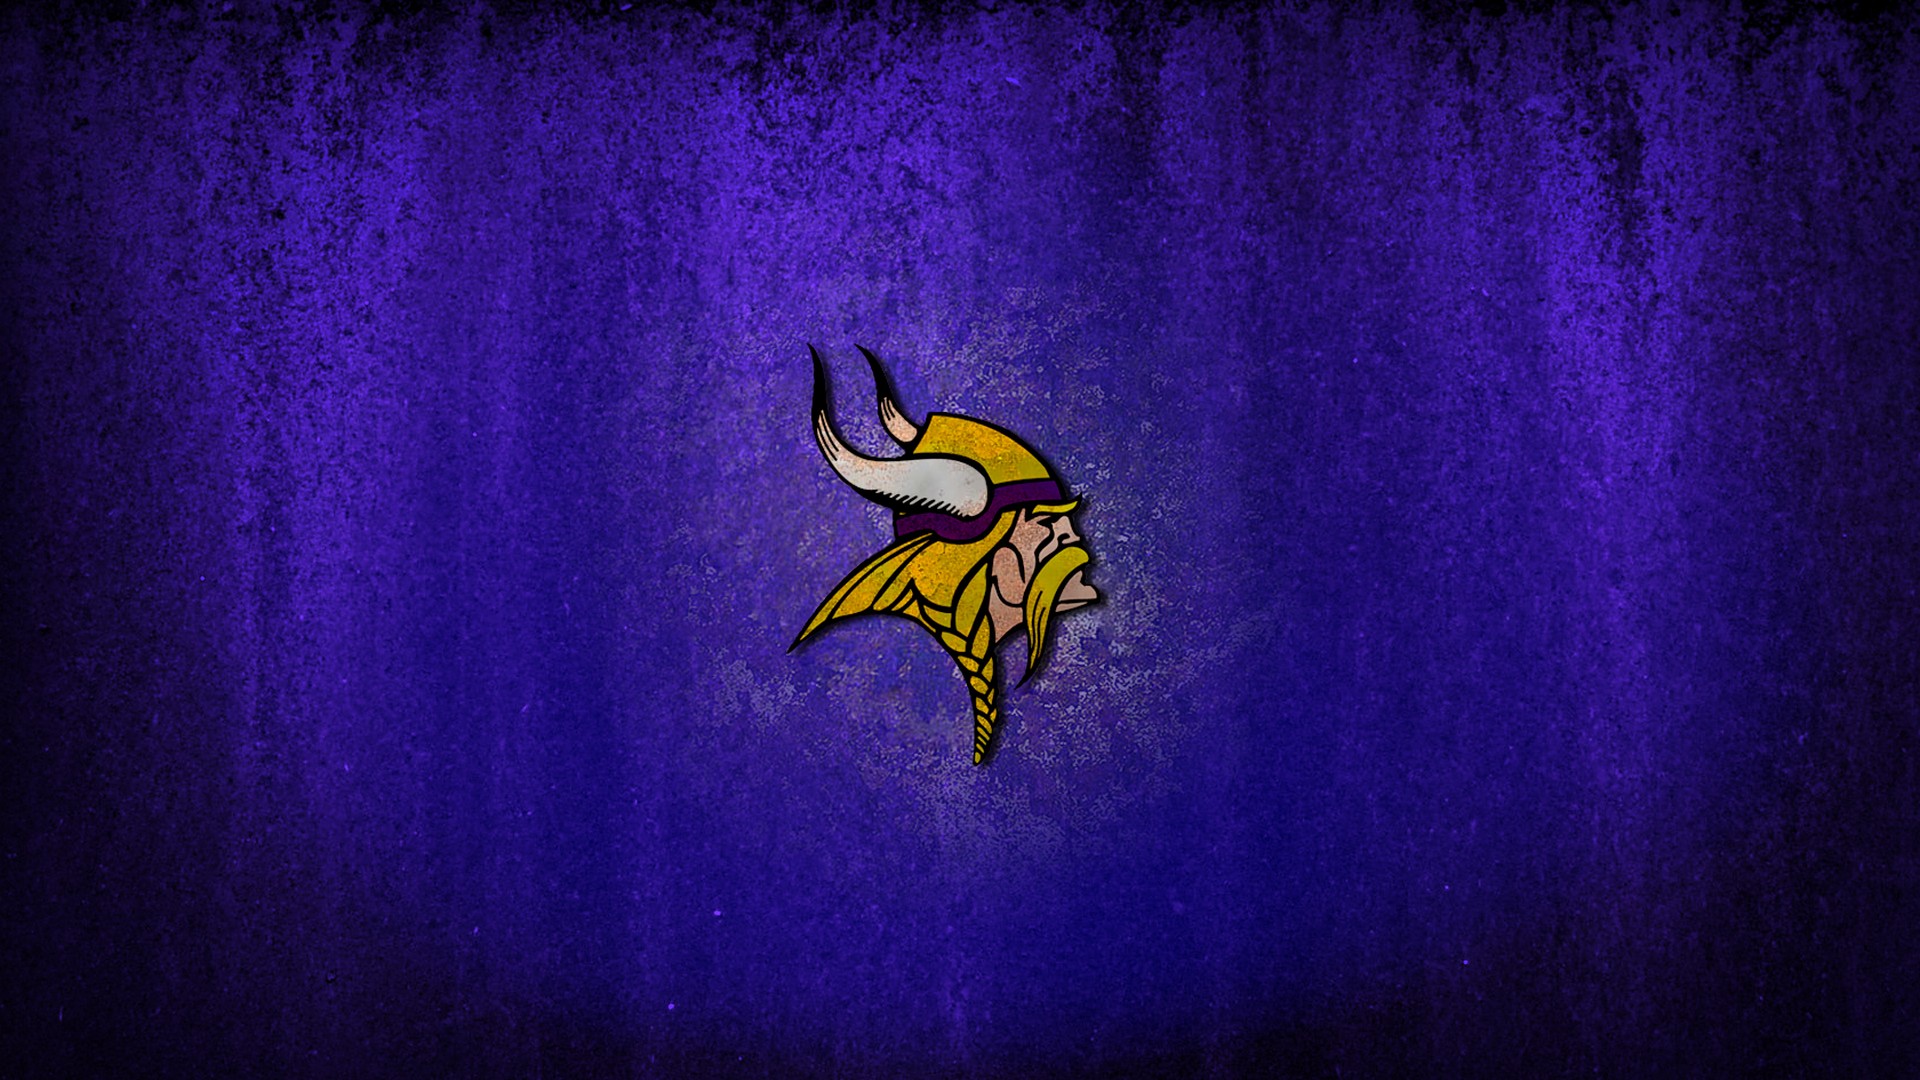 Wallpapers Minnesota Vikings With Resolution Pixel - Mn Vikings Wallpaper Hd - HD Wallpaper 